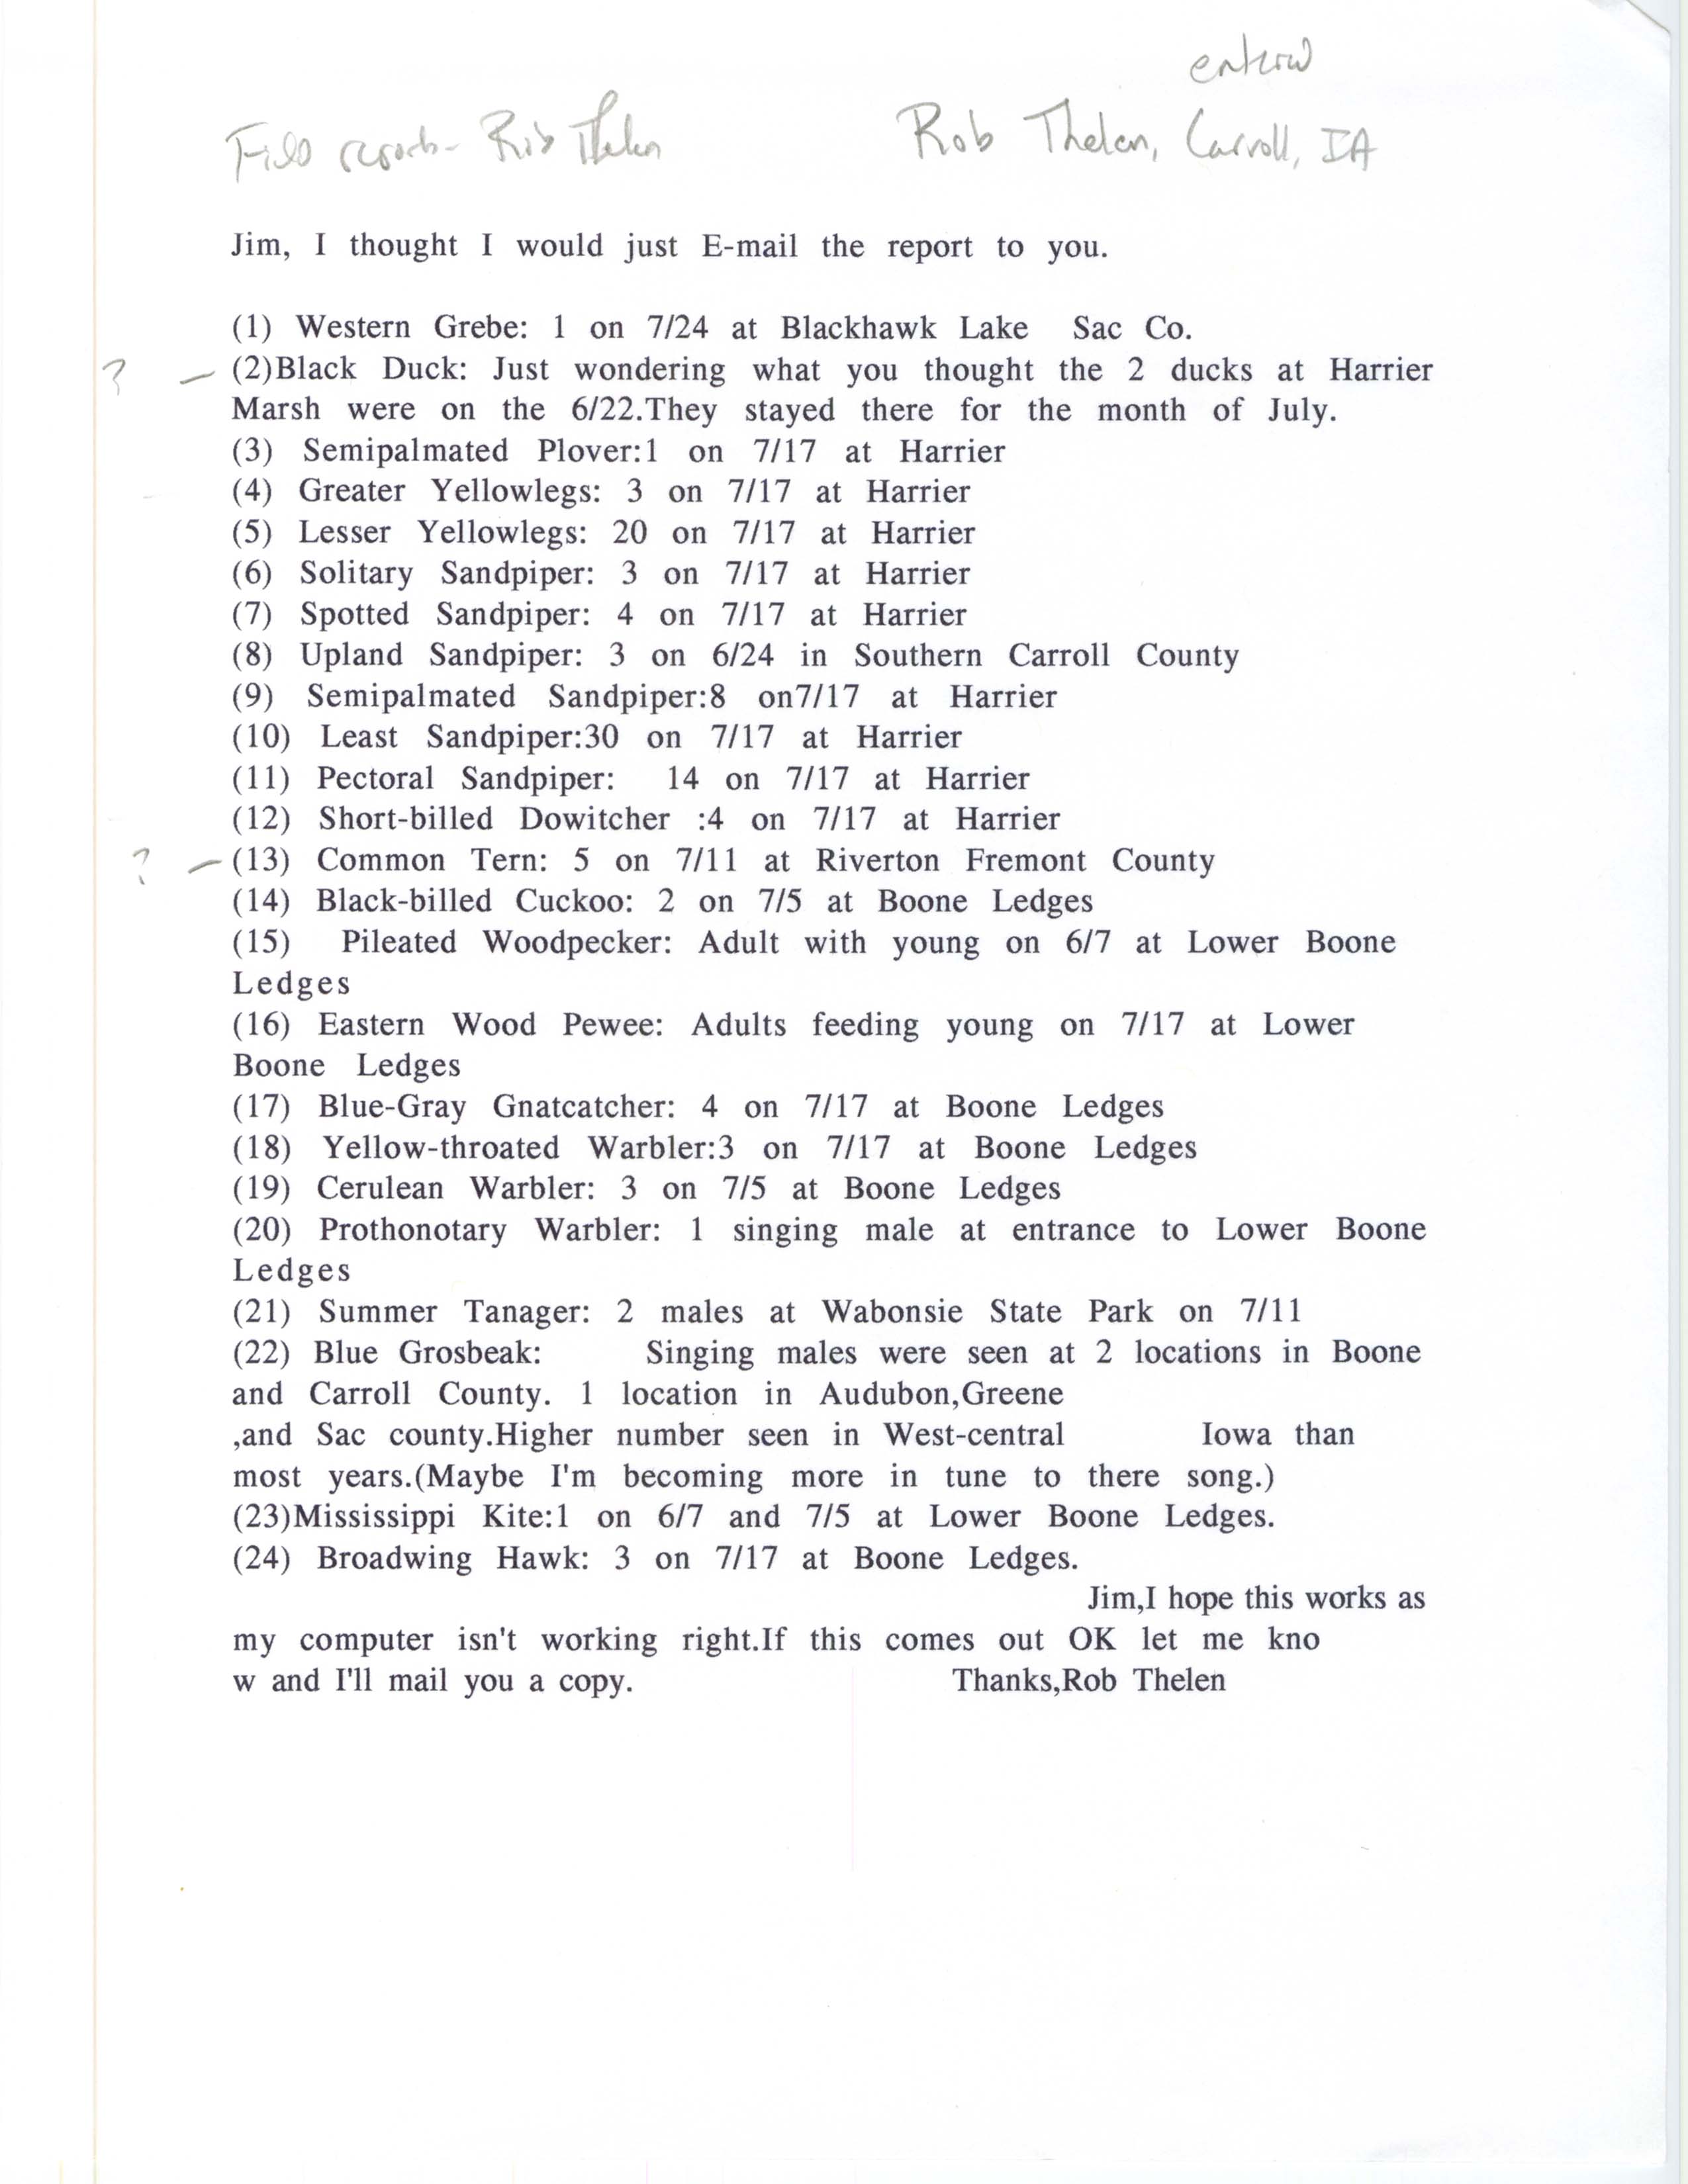 Annotated bird sighting list for summer 1999 compiled by Rob Thelen